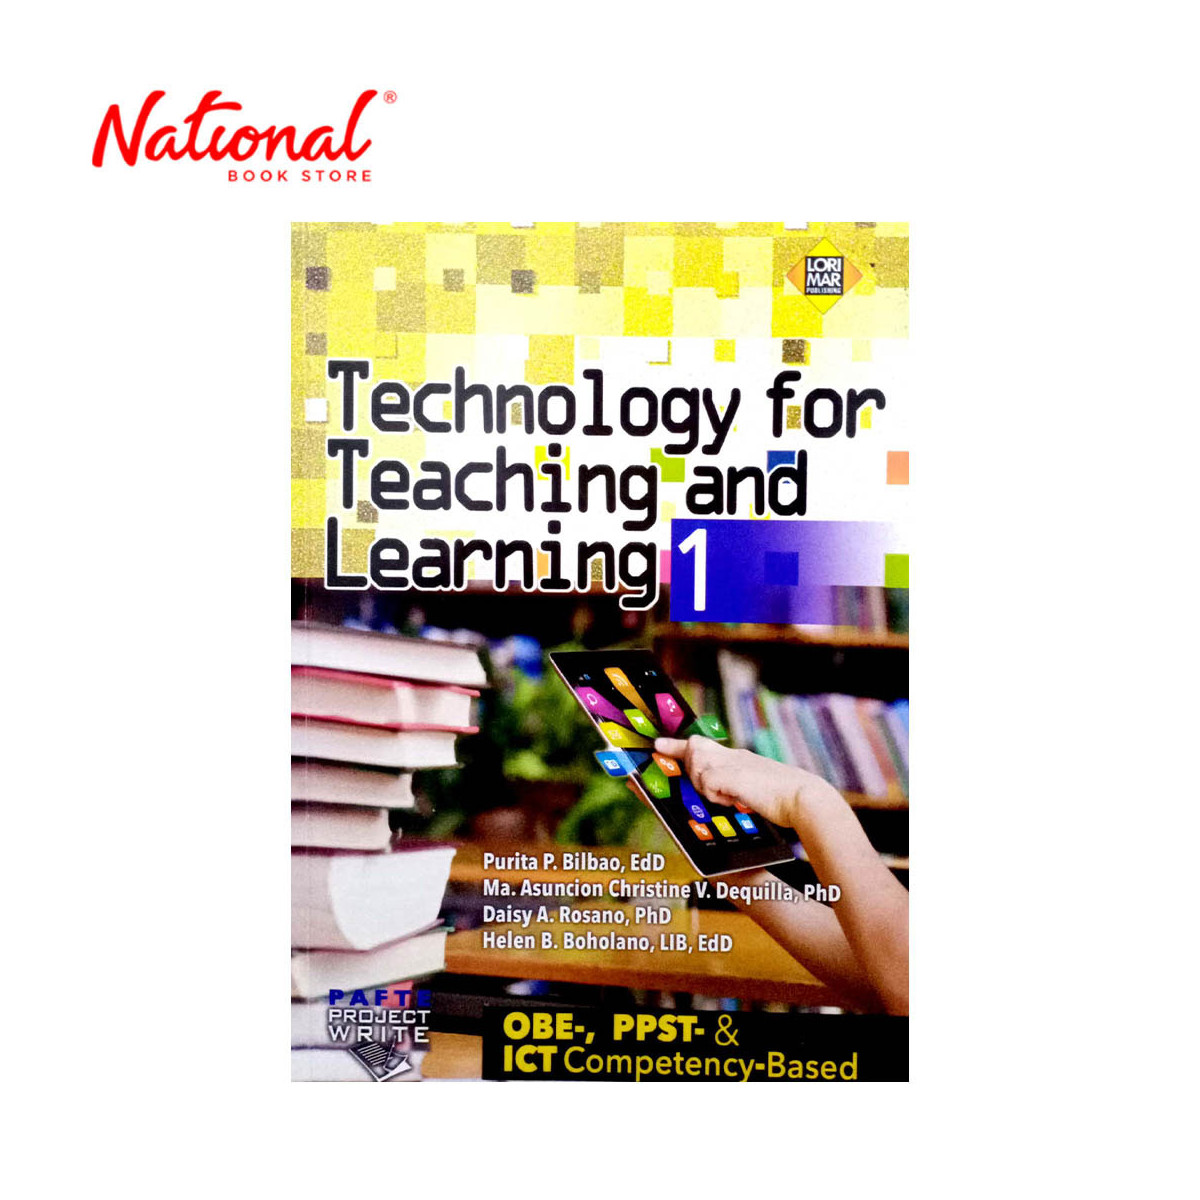 Technology for Teaching and Learning 1 by Dr. Purita P. Bilbao, et al. - Trade Paperback - College